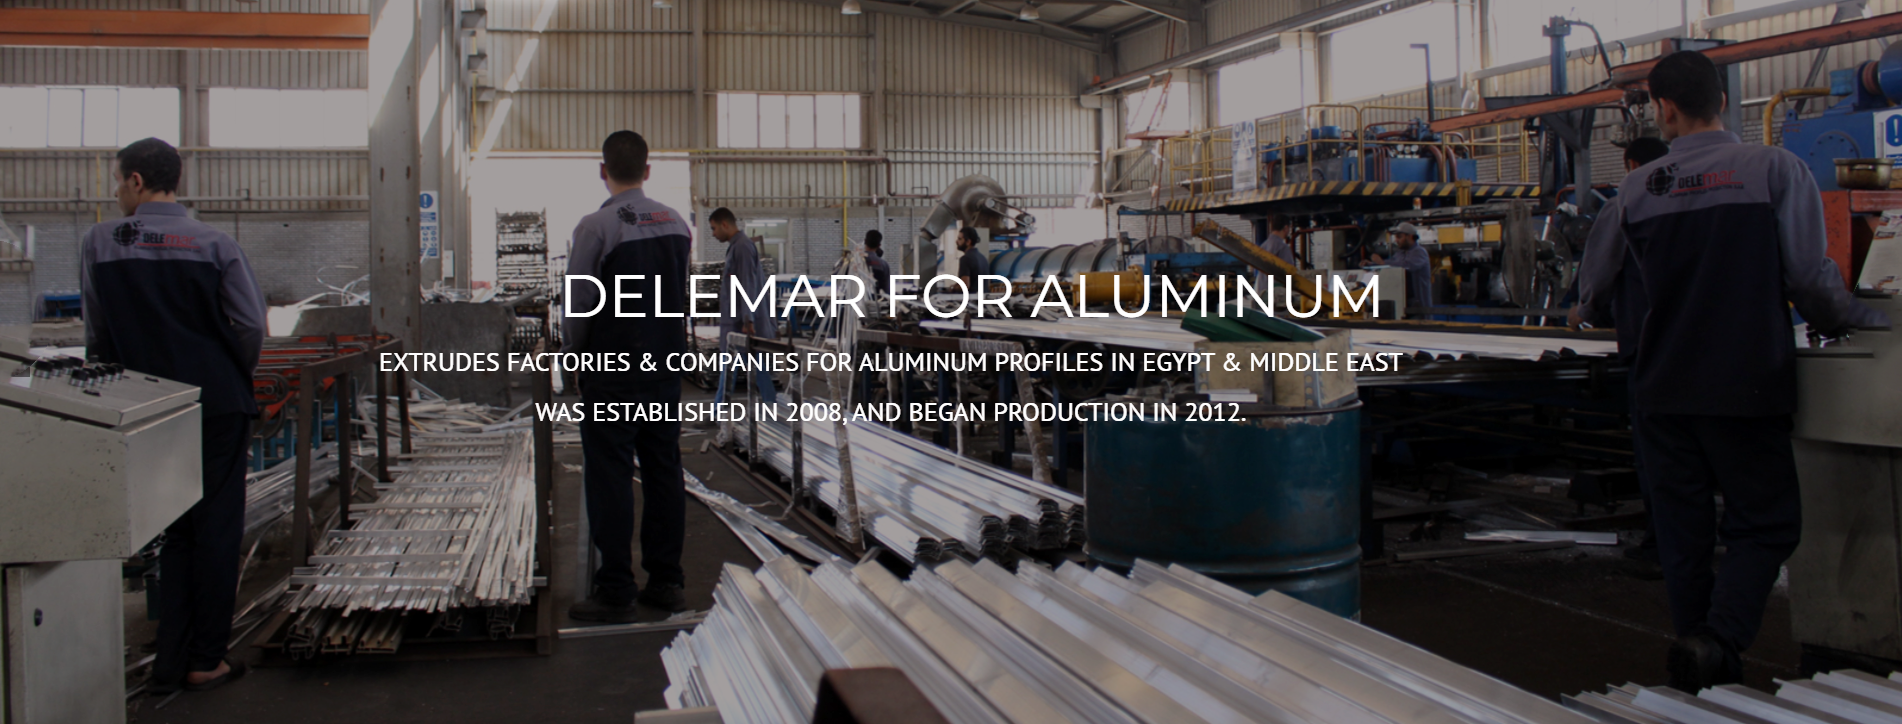 Figure 1  The Egyptian industrial group Delemar 